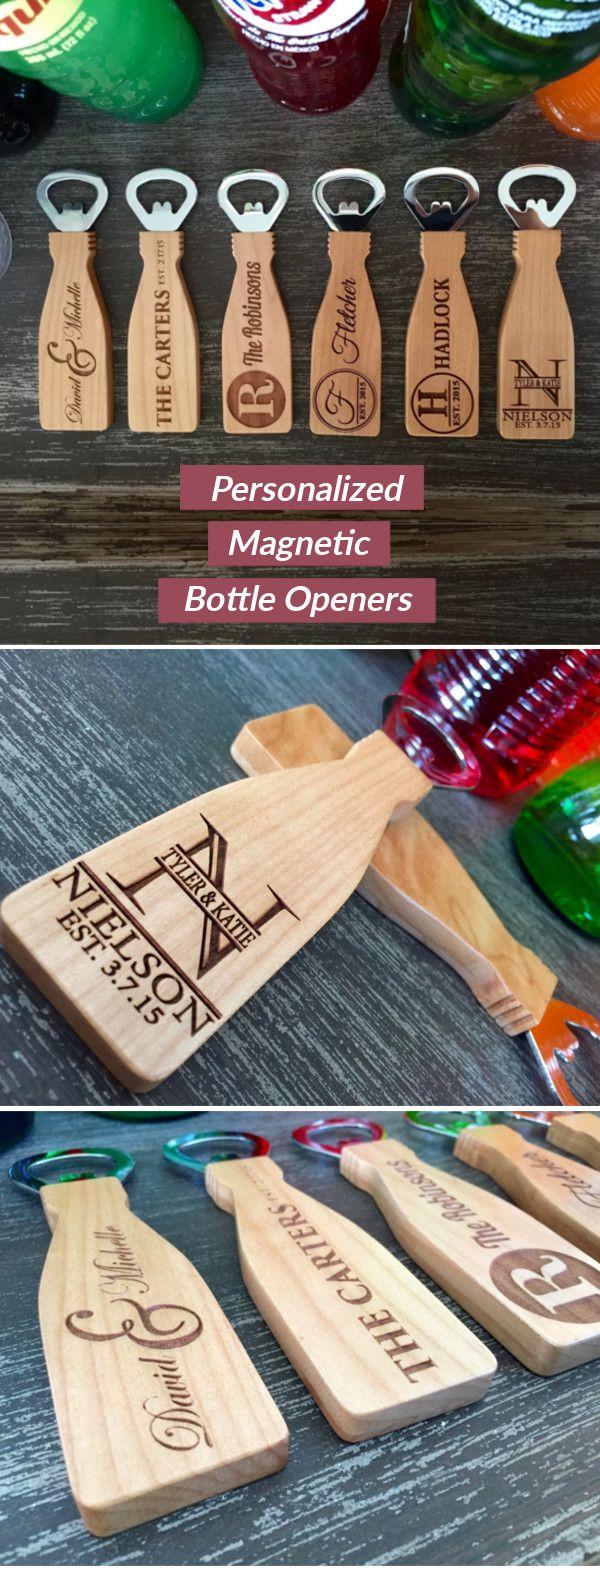 Wedding - Personalized Magnetic Bottle Openers - 6 Classic Designs!